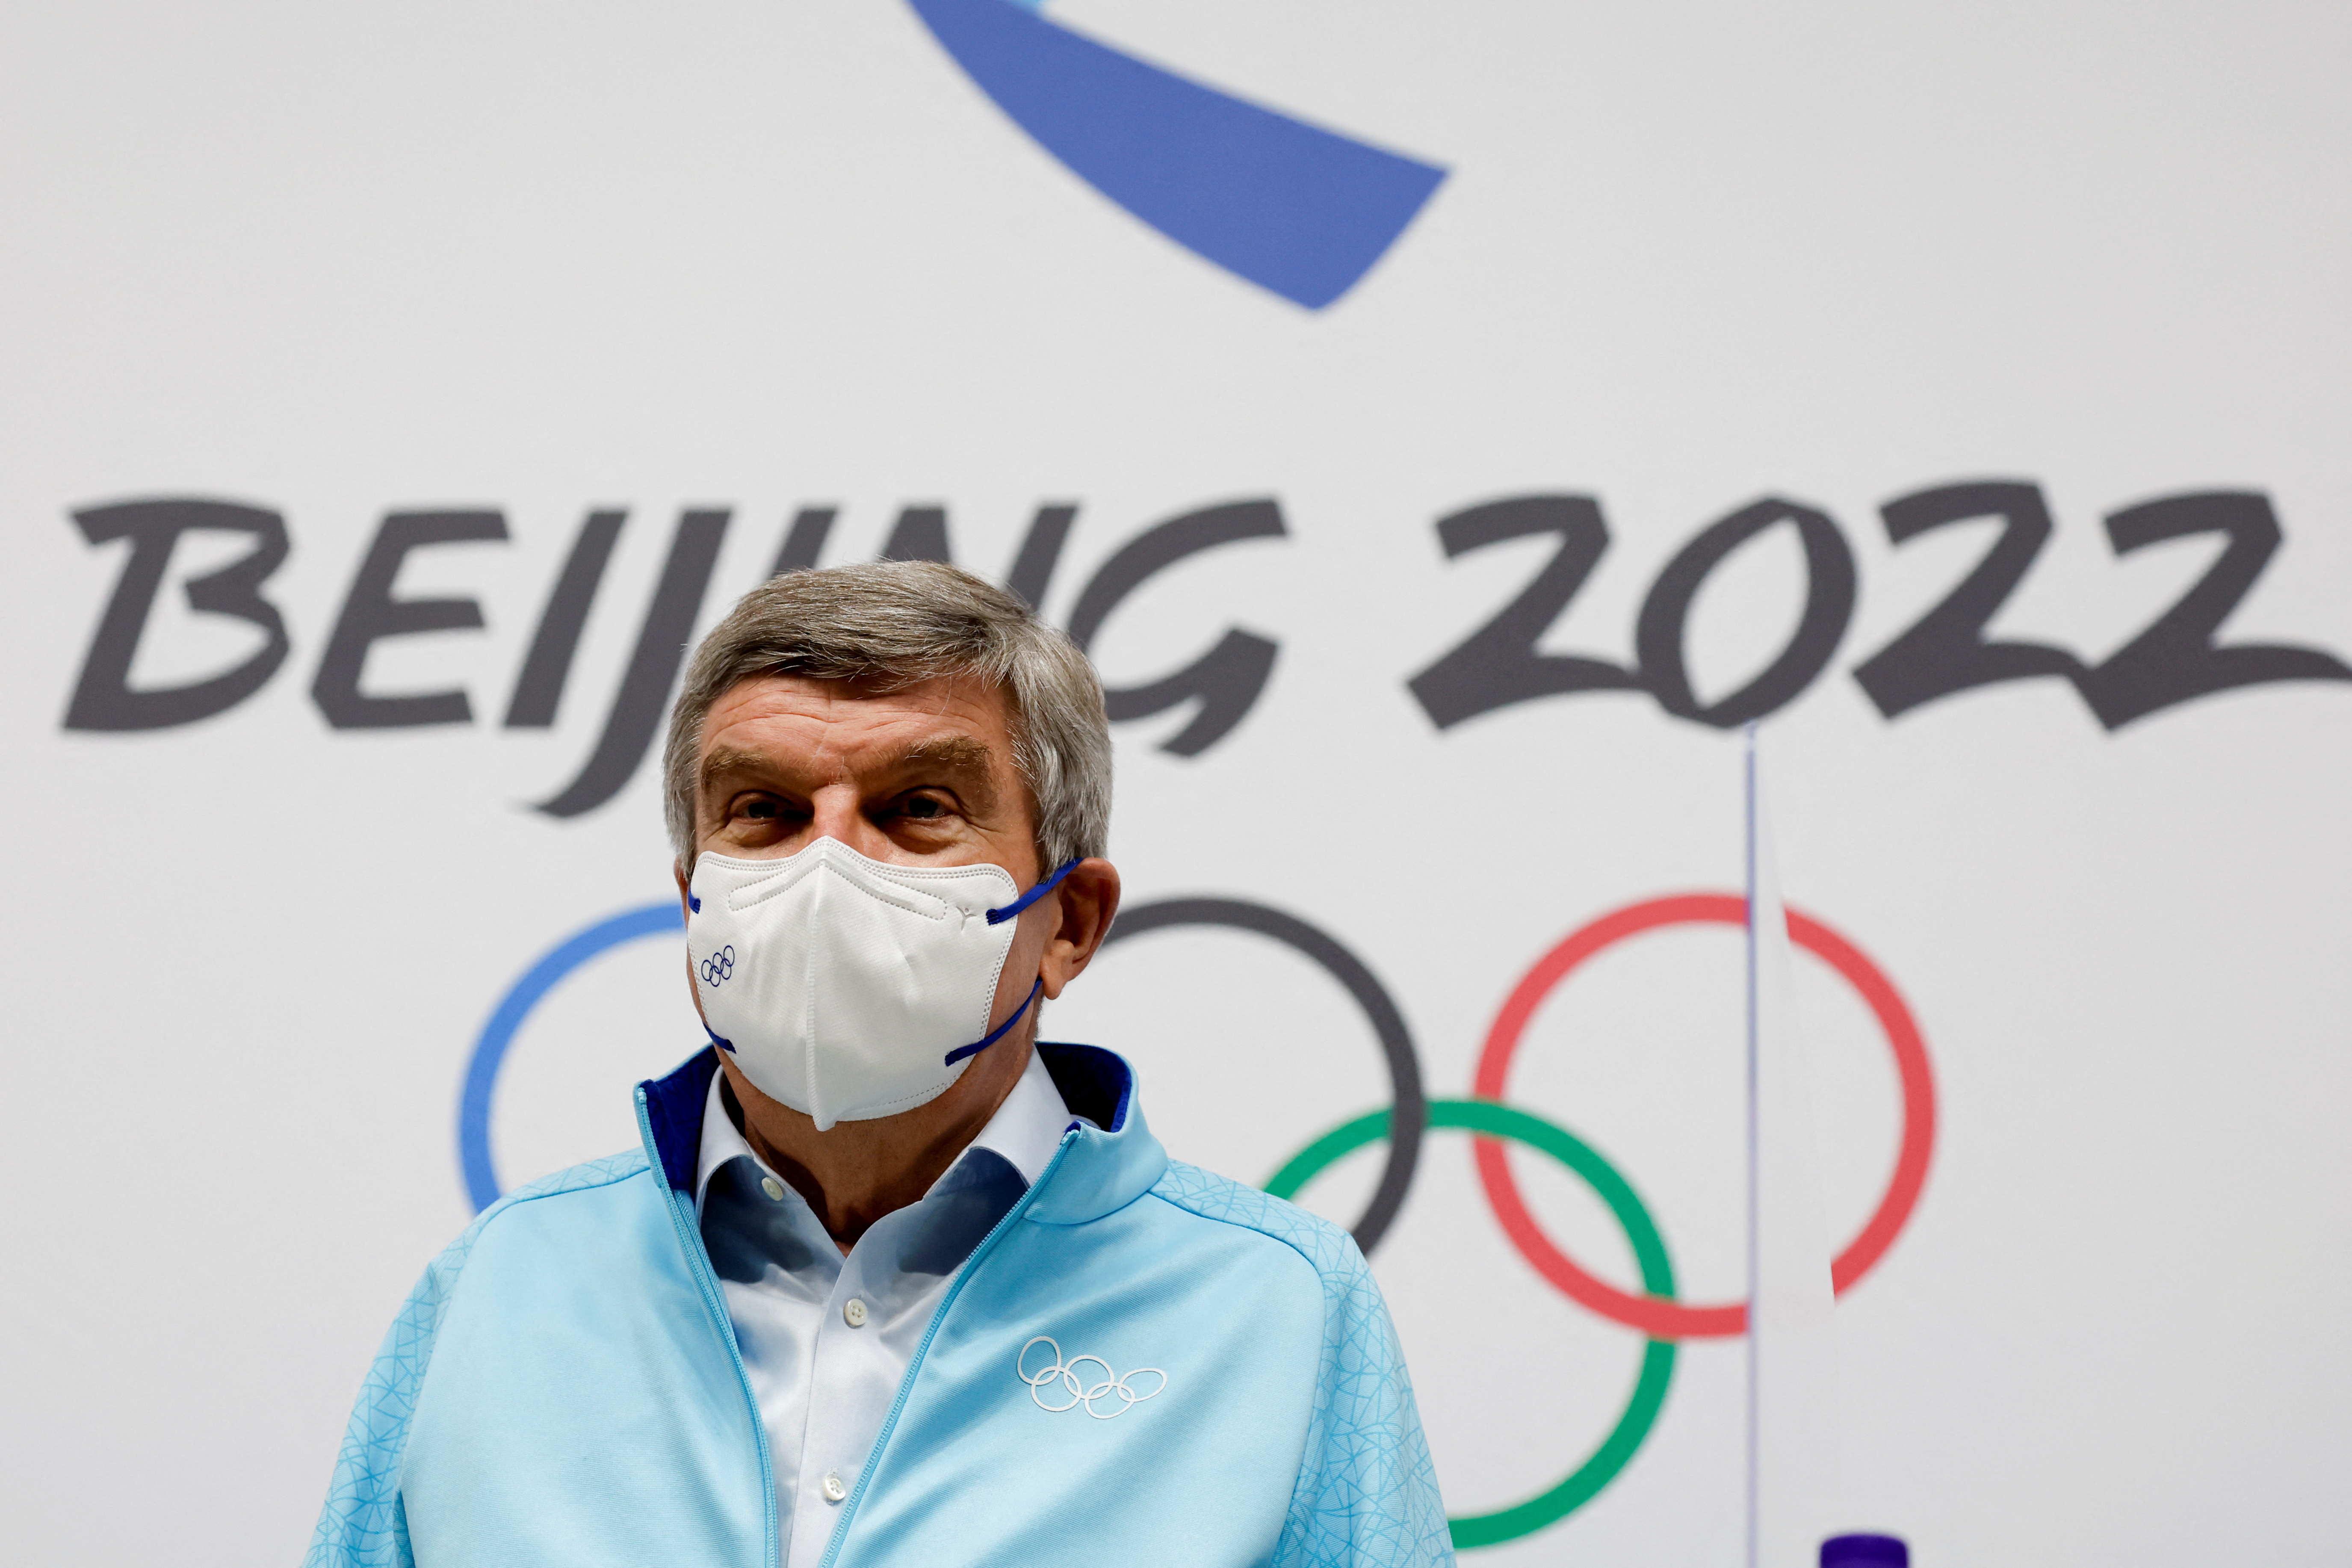 International Olympic Committee (IOC) President Thomas Bach attends a news conference during the Beijing Winter Olympics in Beijing, China, February 18, 2022. REUTERS/Tyrone Siu